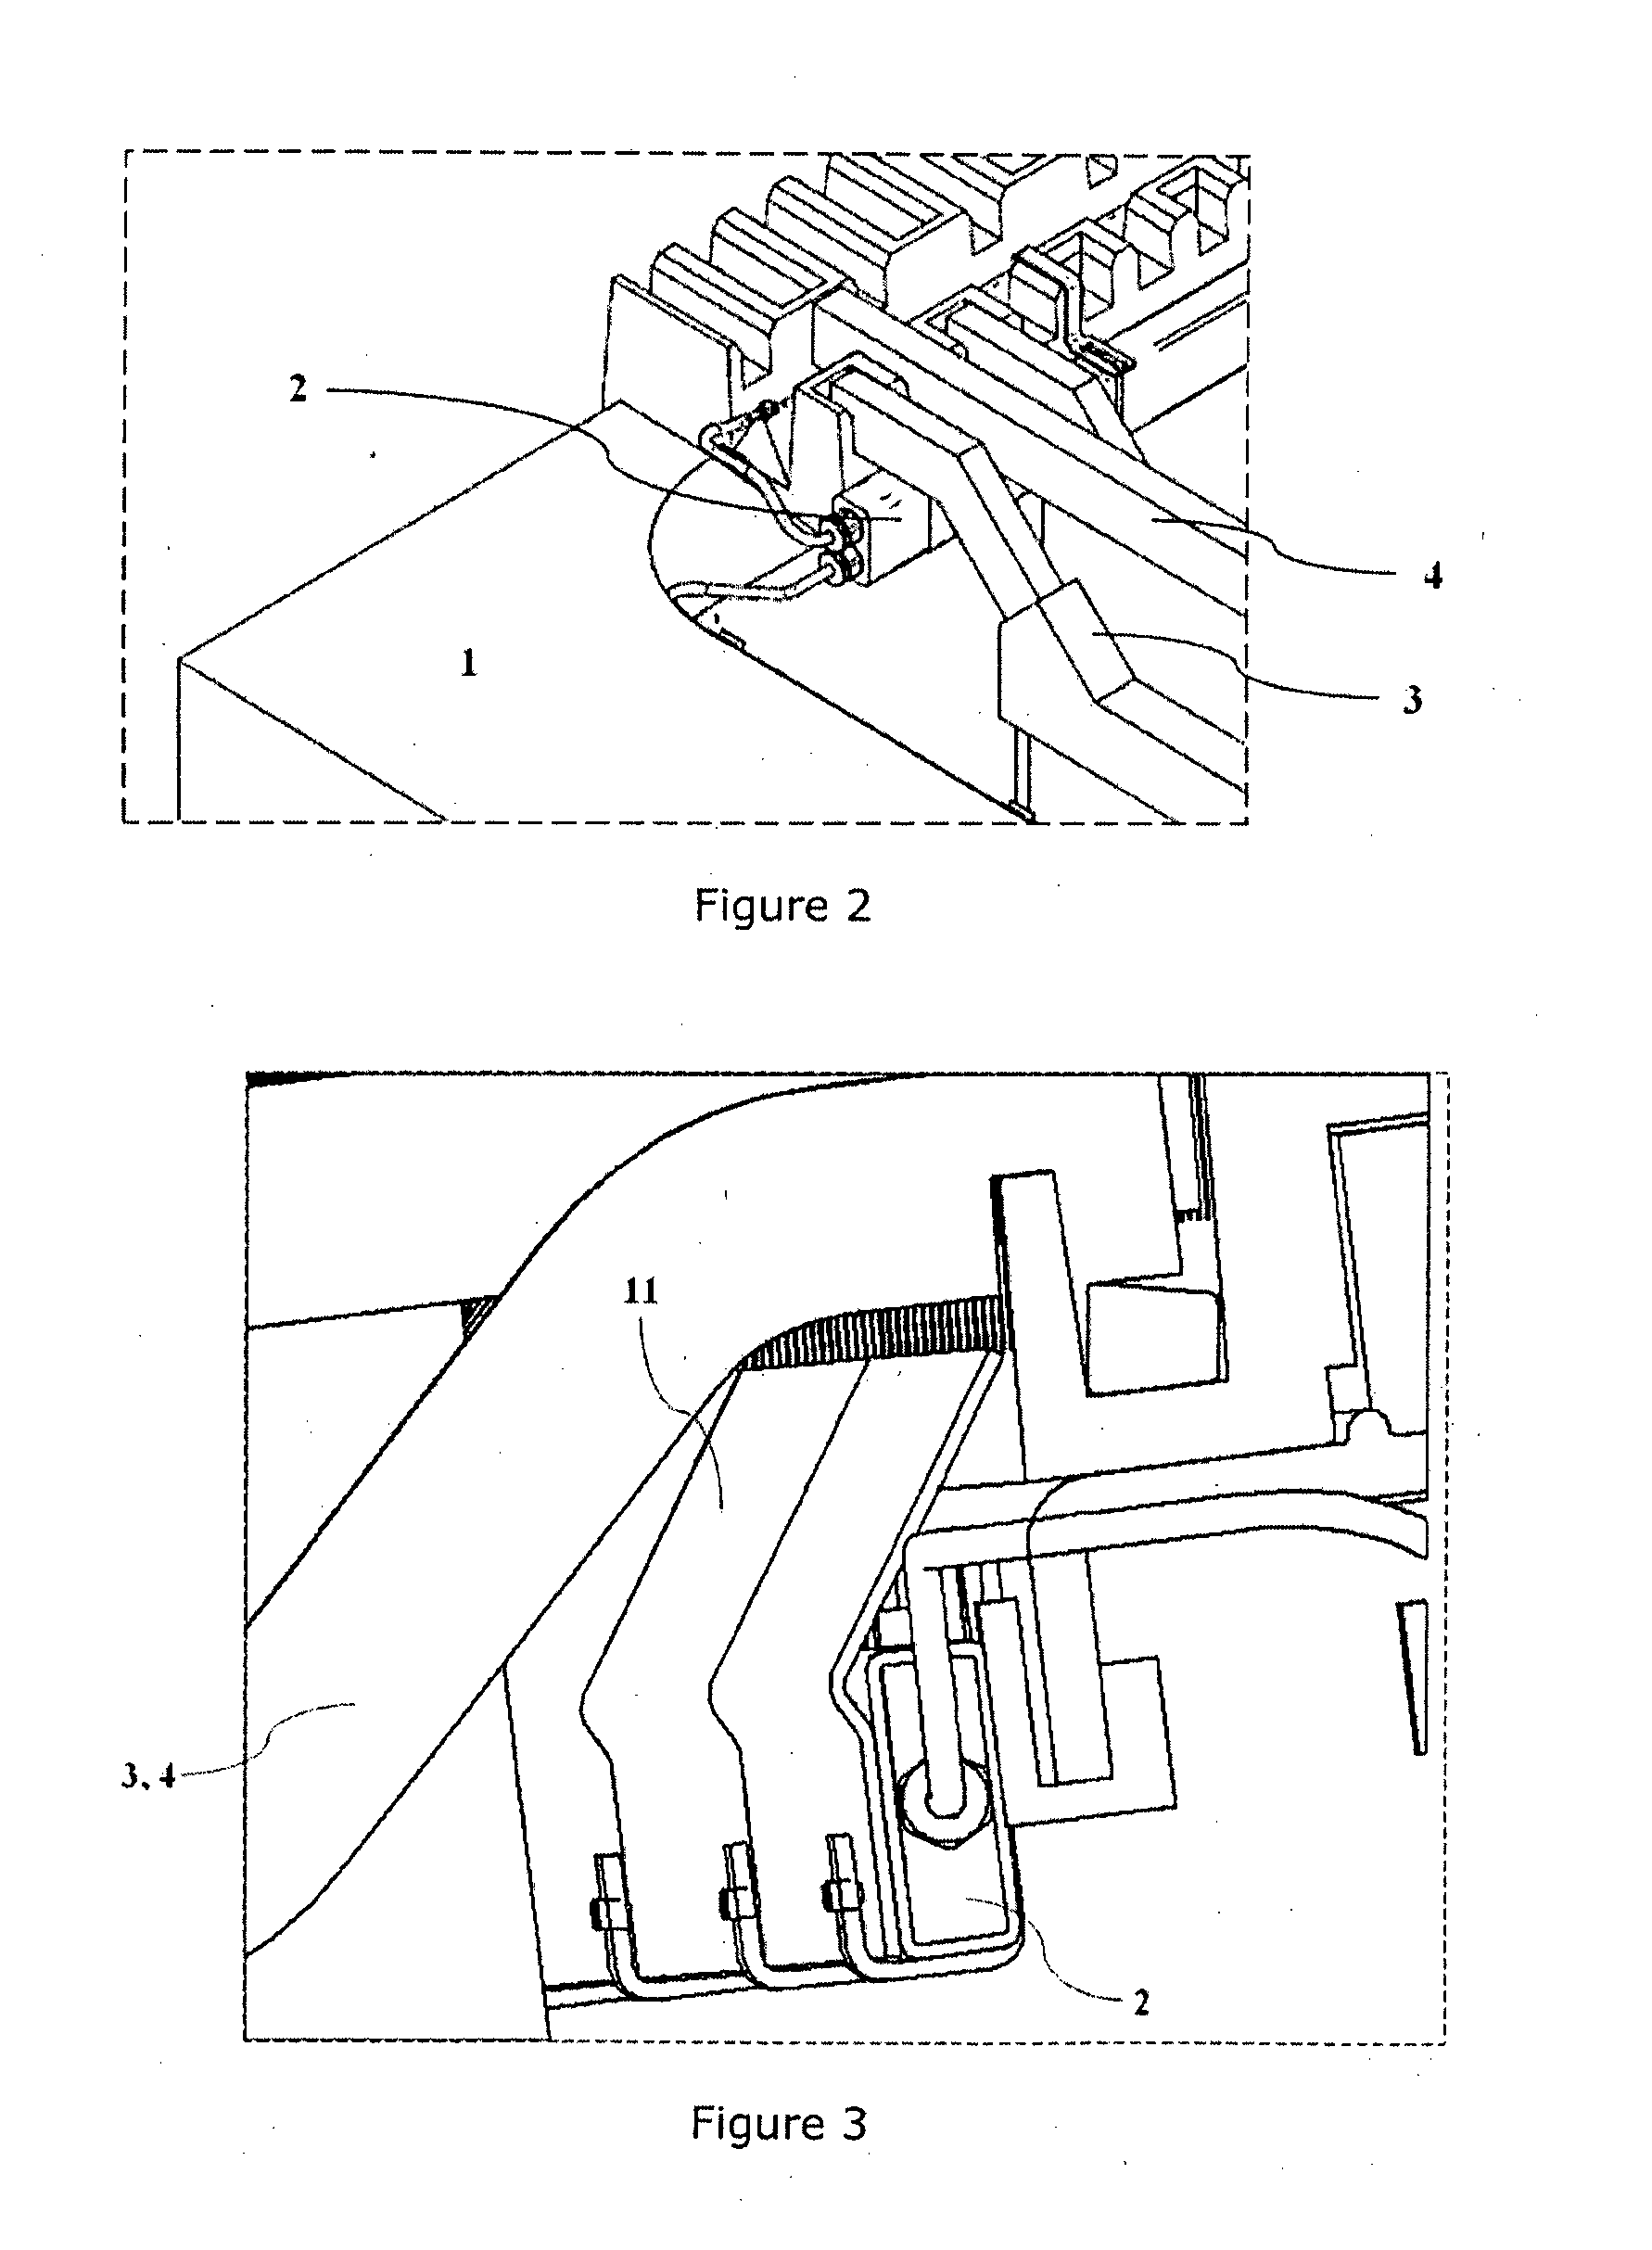 Electric current sensing and management system for electrolytic plants